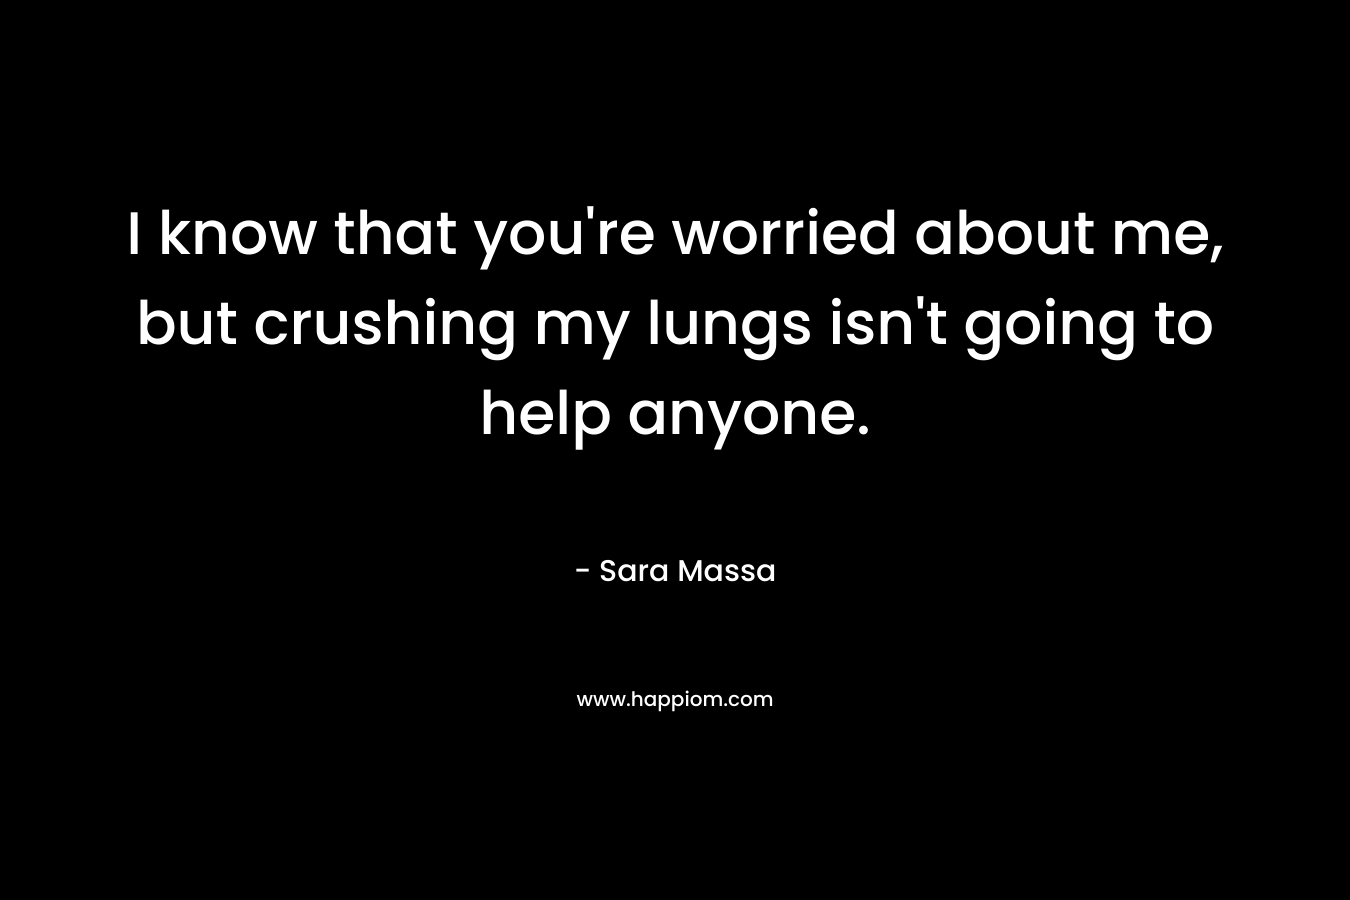 I know that you’re worried about me, but crushing my lungs isn’t going to help anyone. – Sara Massa